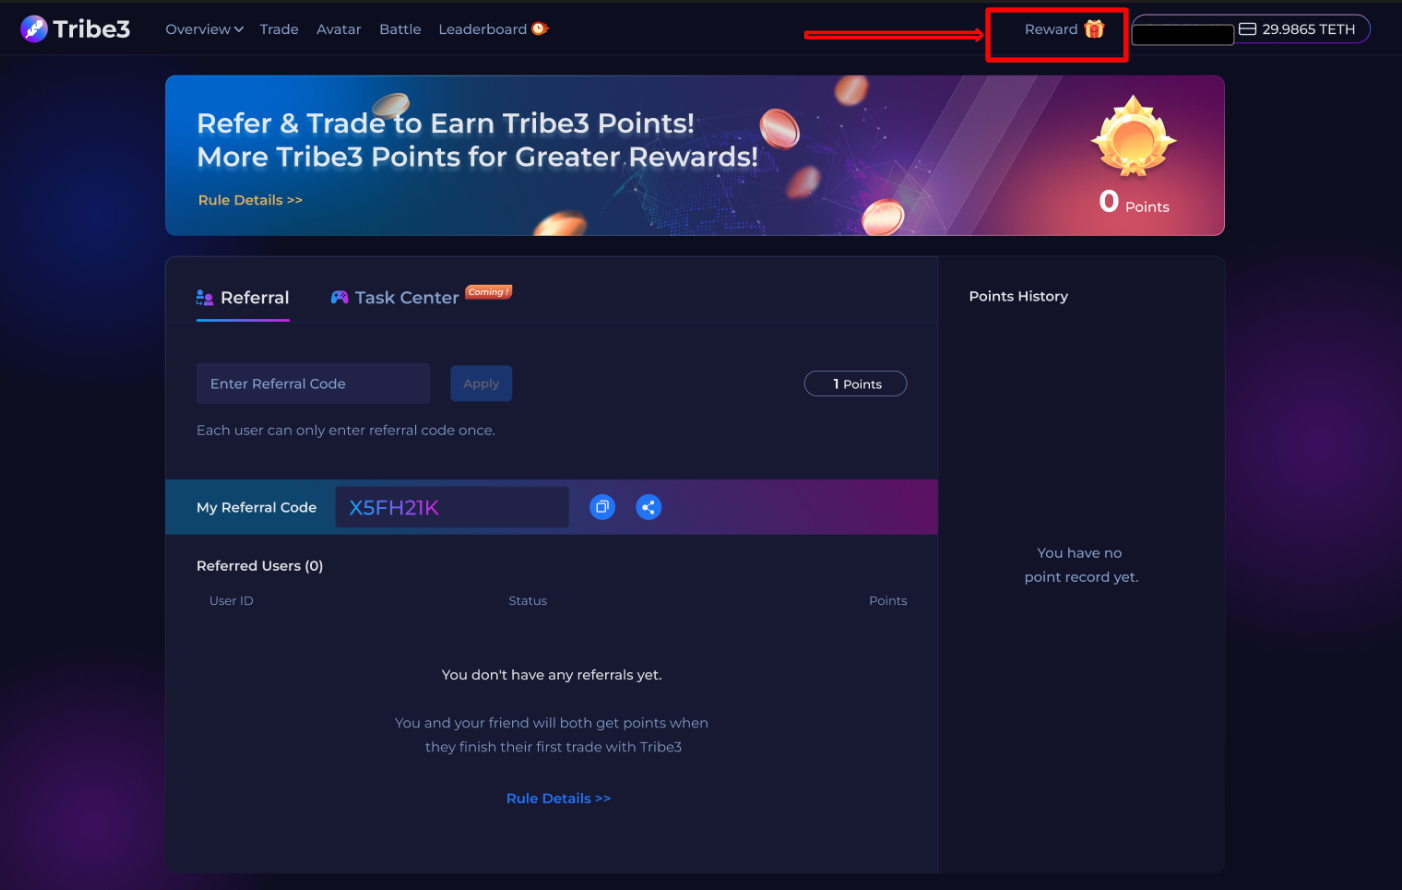 Click the “Reward” button next to your wallet address to access the Referral Program Page